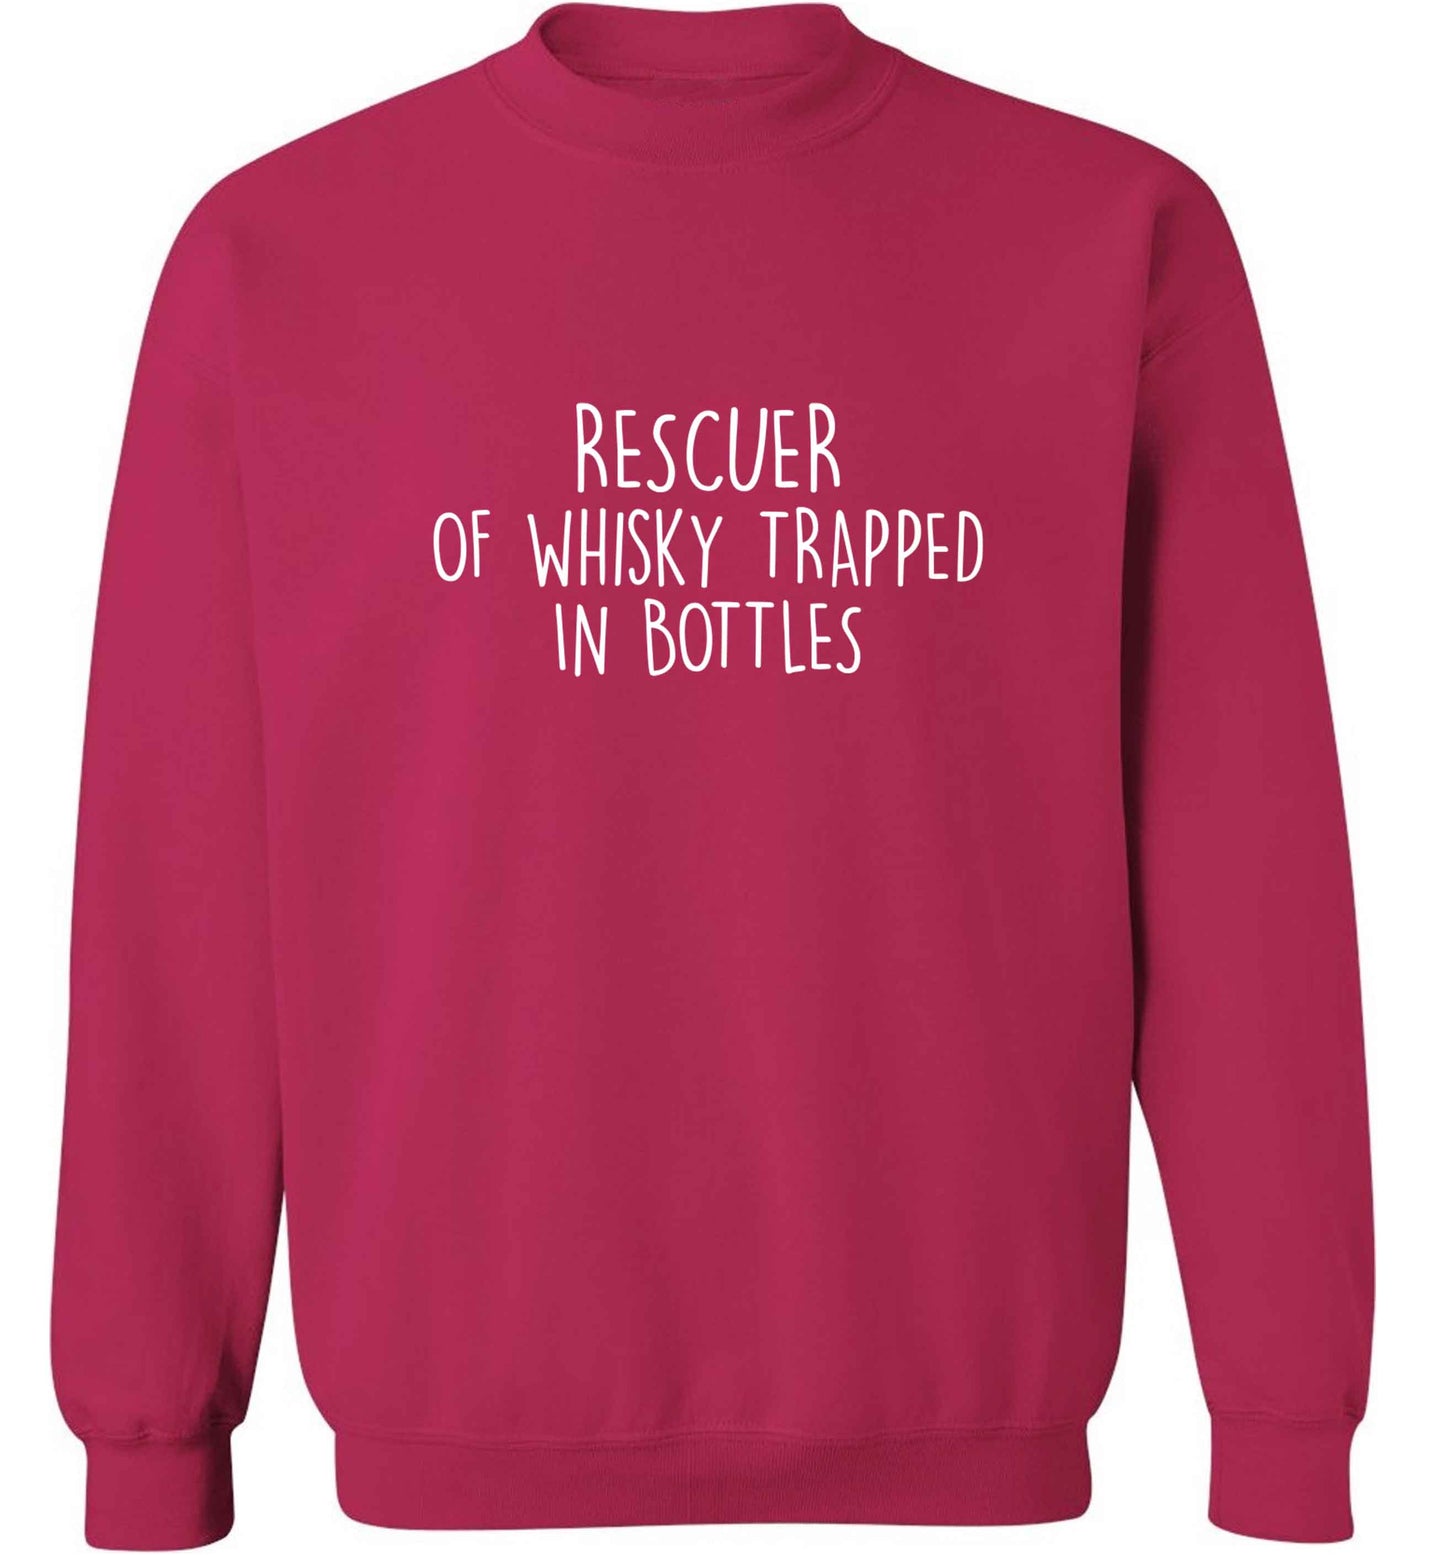 Rescuer of whisky trapped in bottles adult's unisex pink sweater 2XL